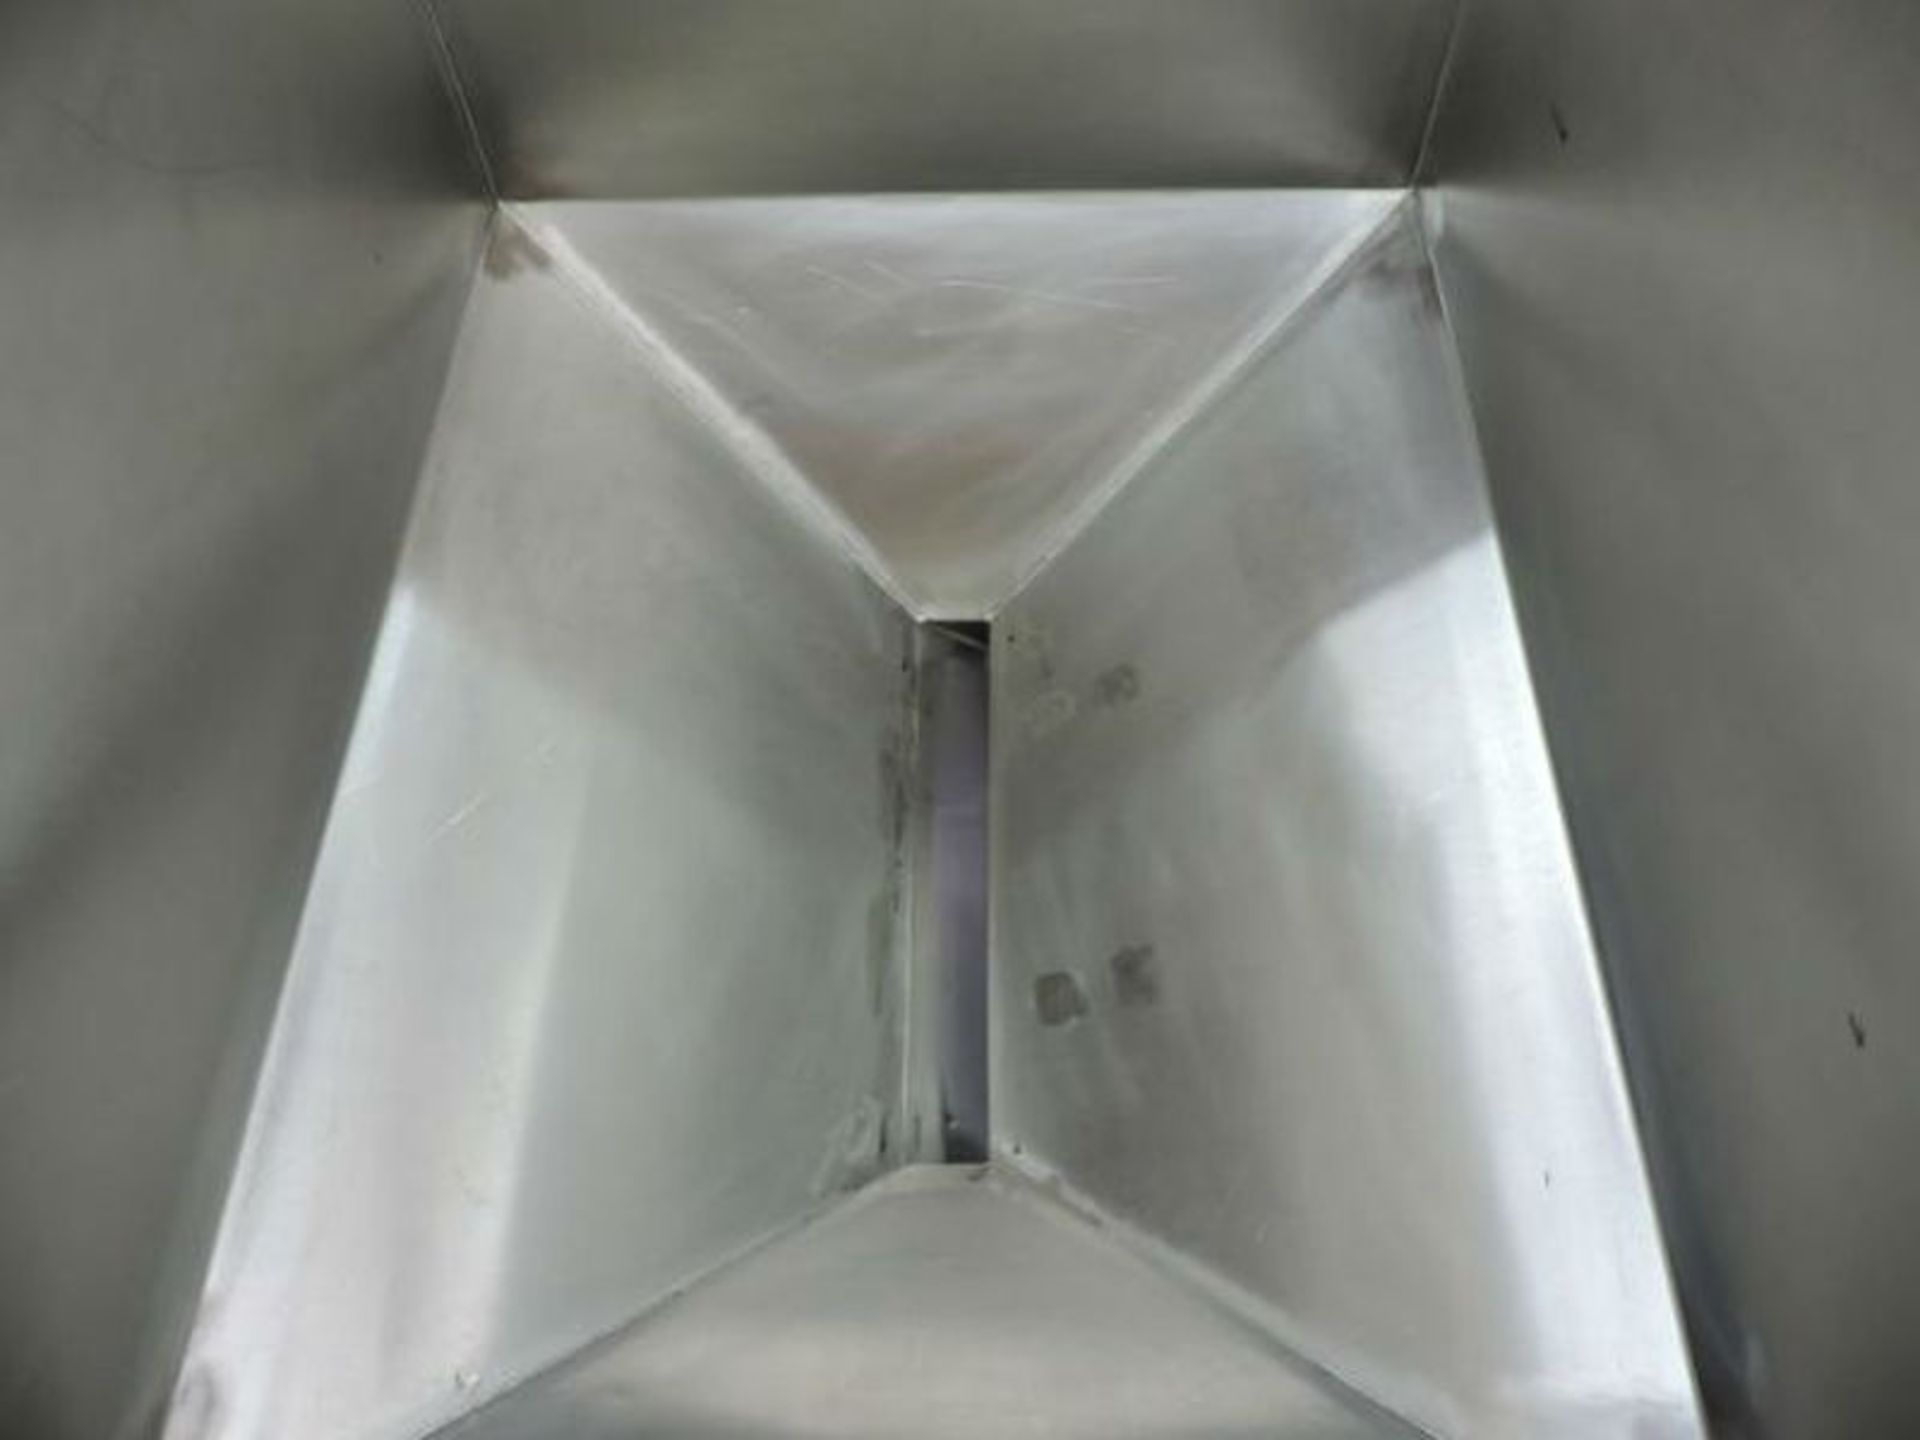 Stainless Steel Vibratory Feeder - NO RESERVE - Vibratory Feeders. Hopper Size: 23" X 29" X 17" - Image 3 of 3